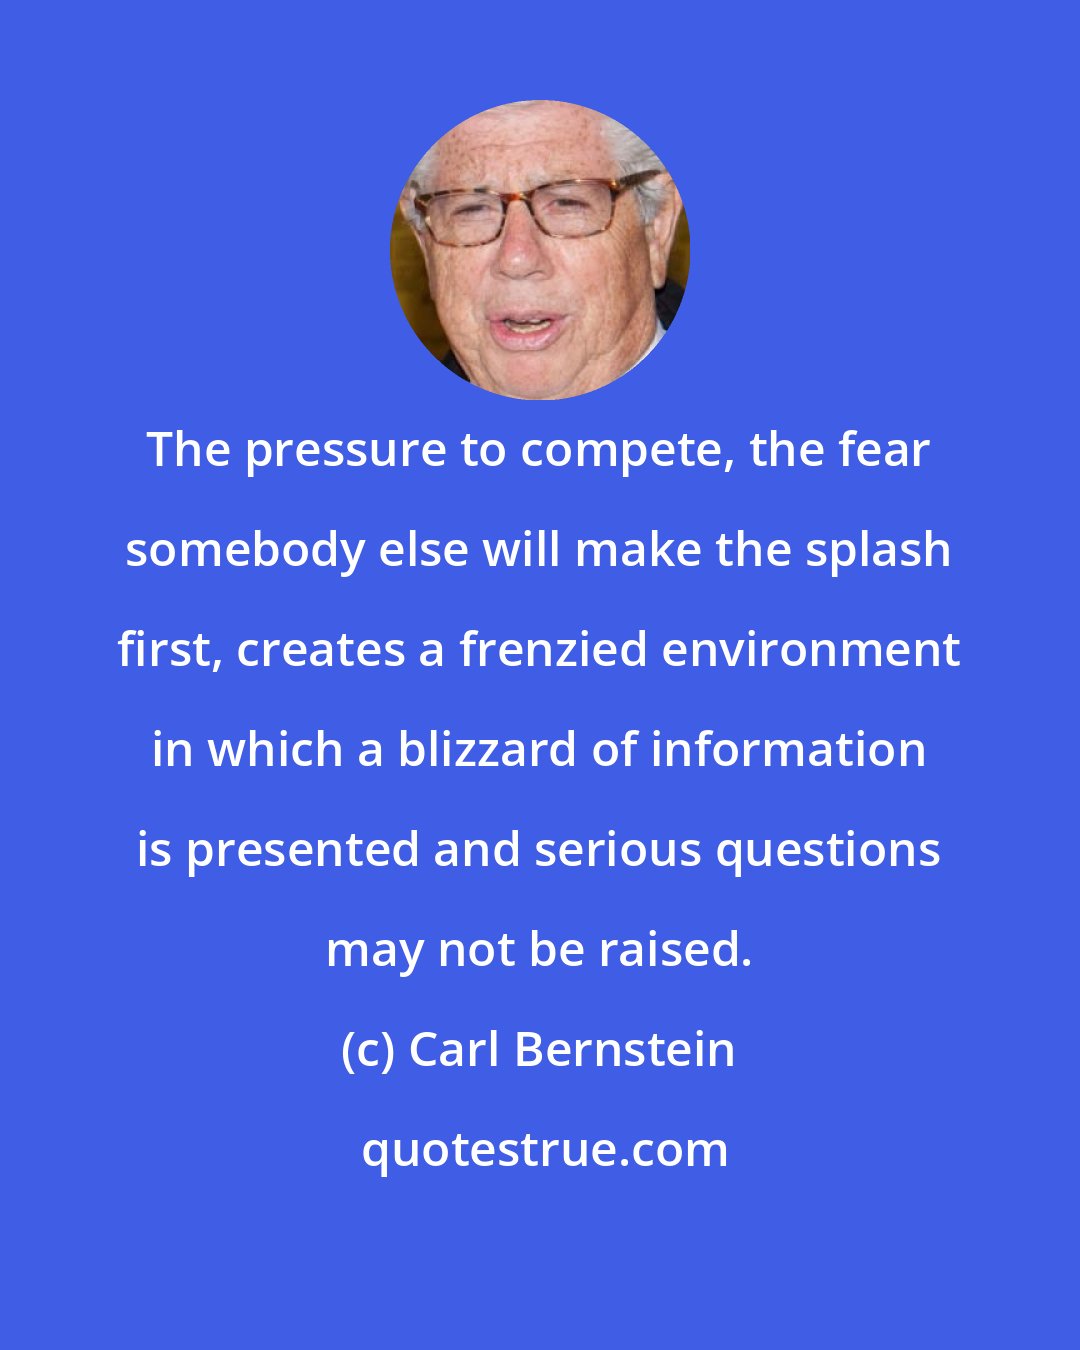 Carl Bernstein: The pressure to compete, the fear somebody else will make the splash first, creates a frenzied environment in which a blizzard of information is presented and serious questions may not be raised.